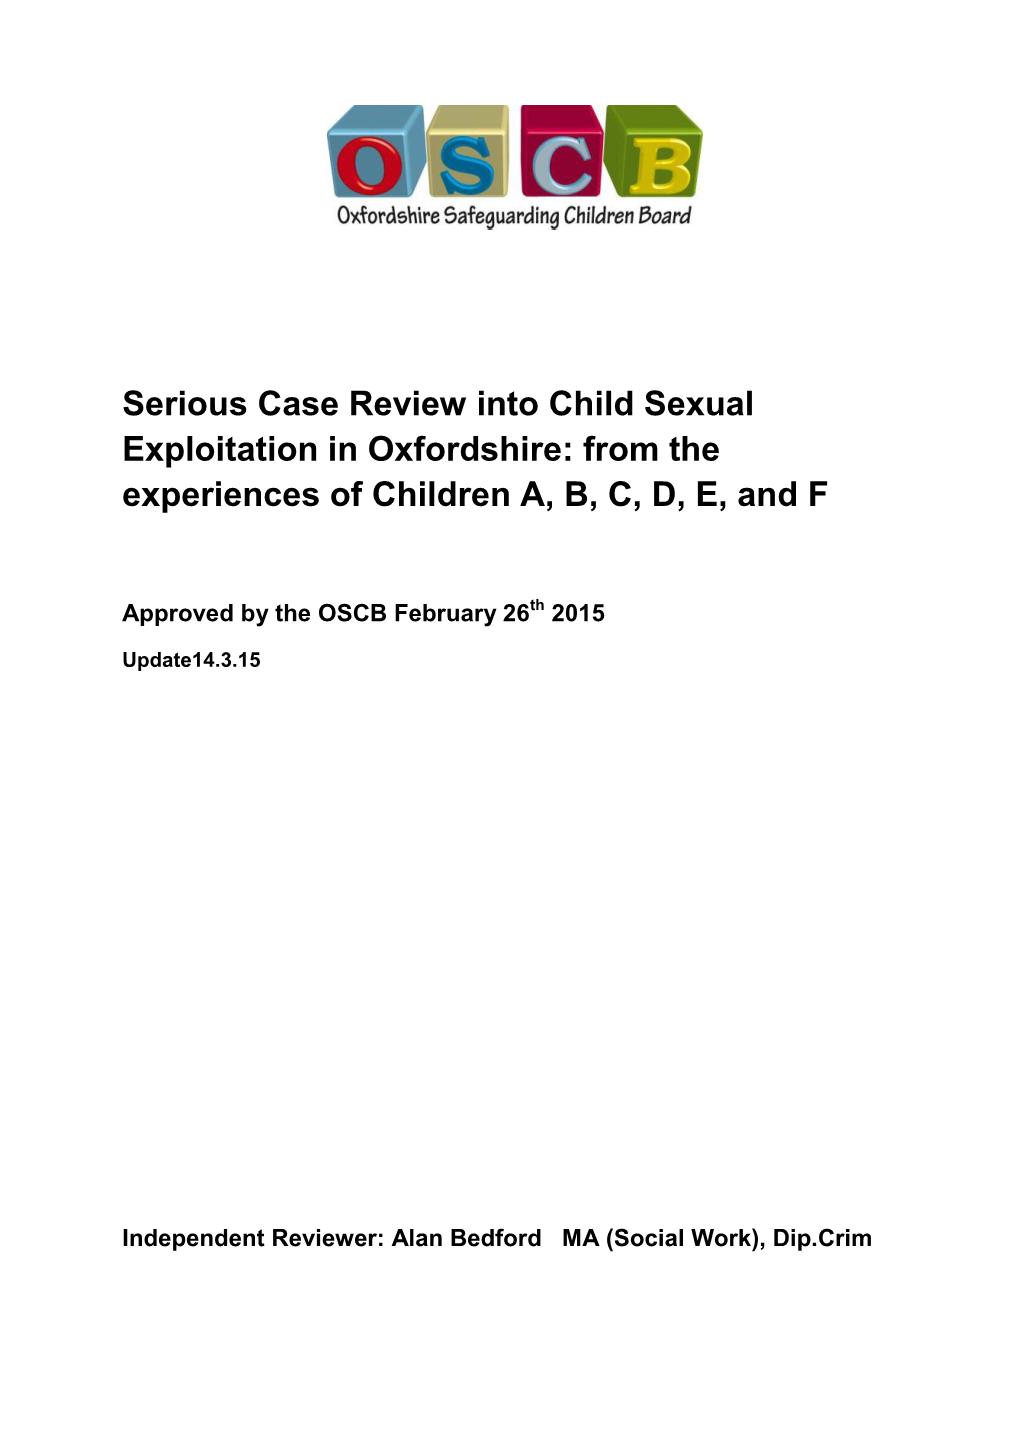 Serious Case Review Into Child Sexual Exploitation in Oxfordshire: from the Experiences of Children A, B, C, D, E, and F